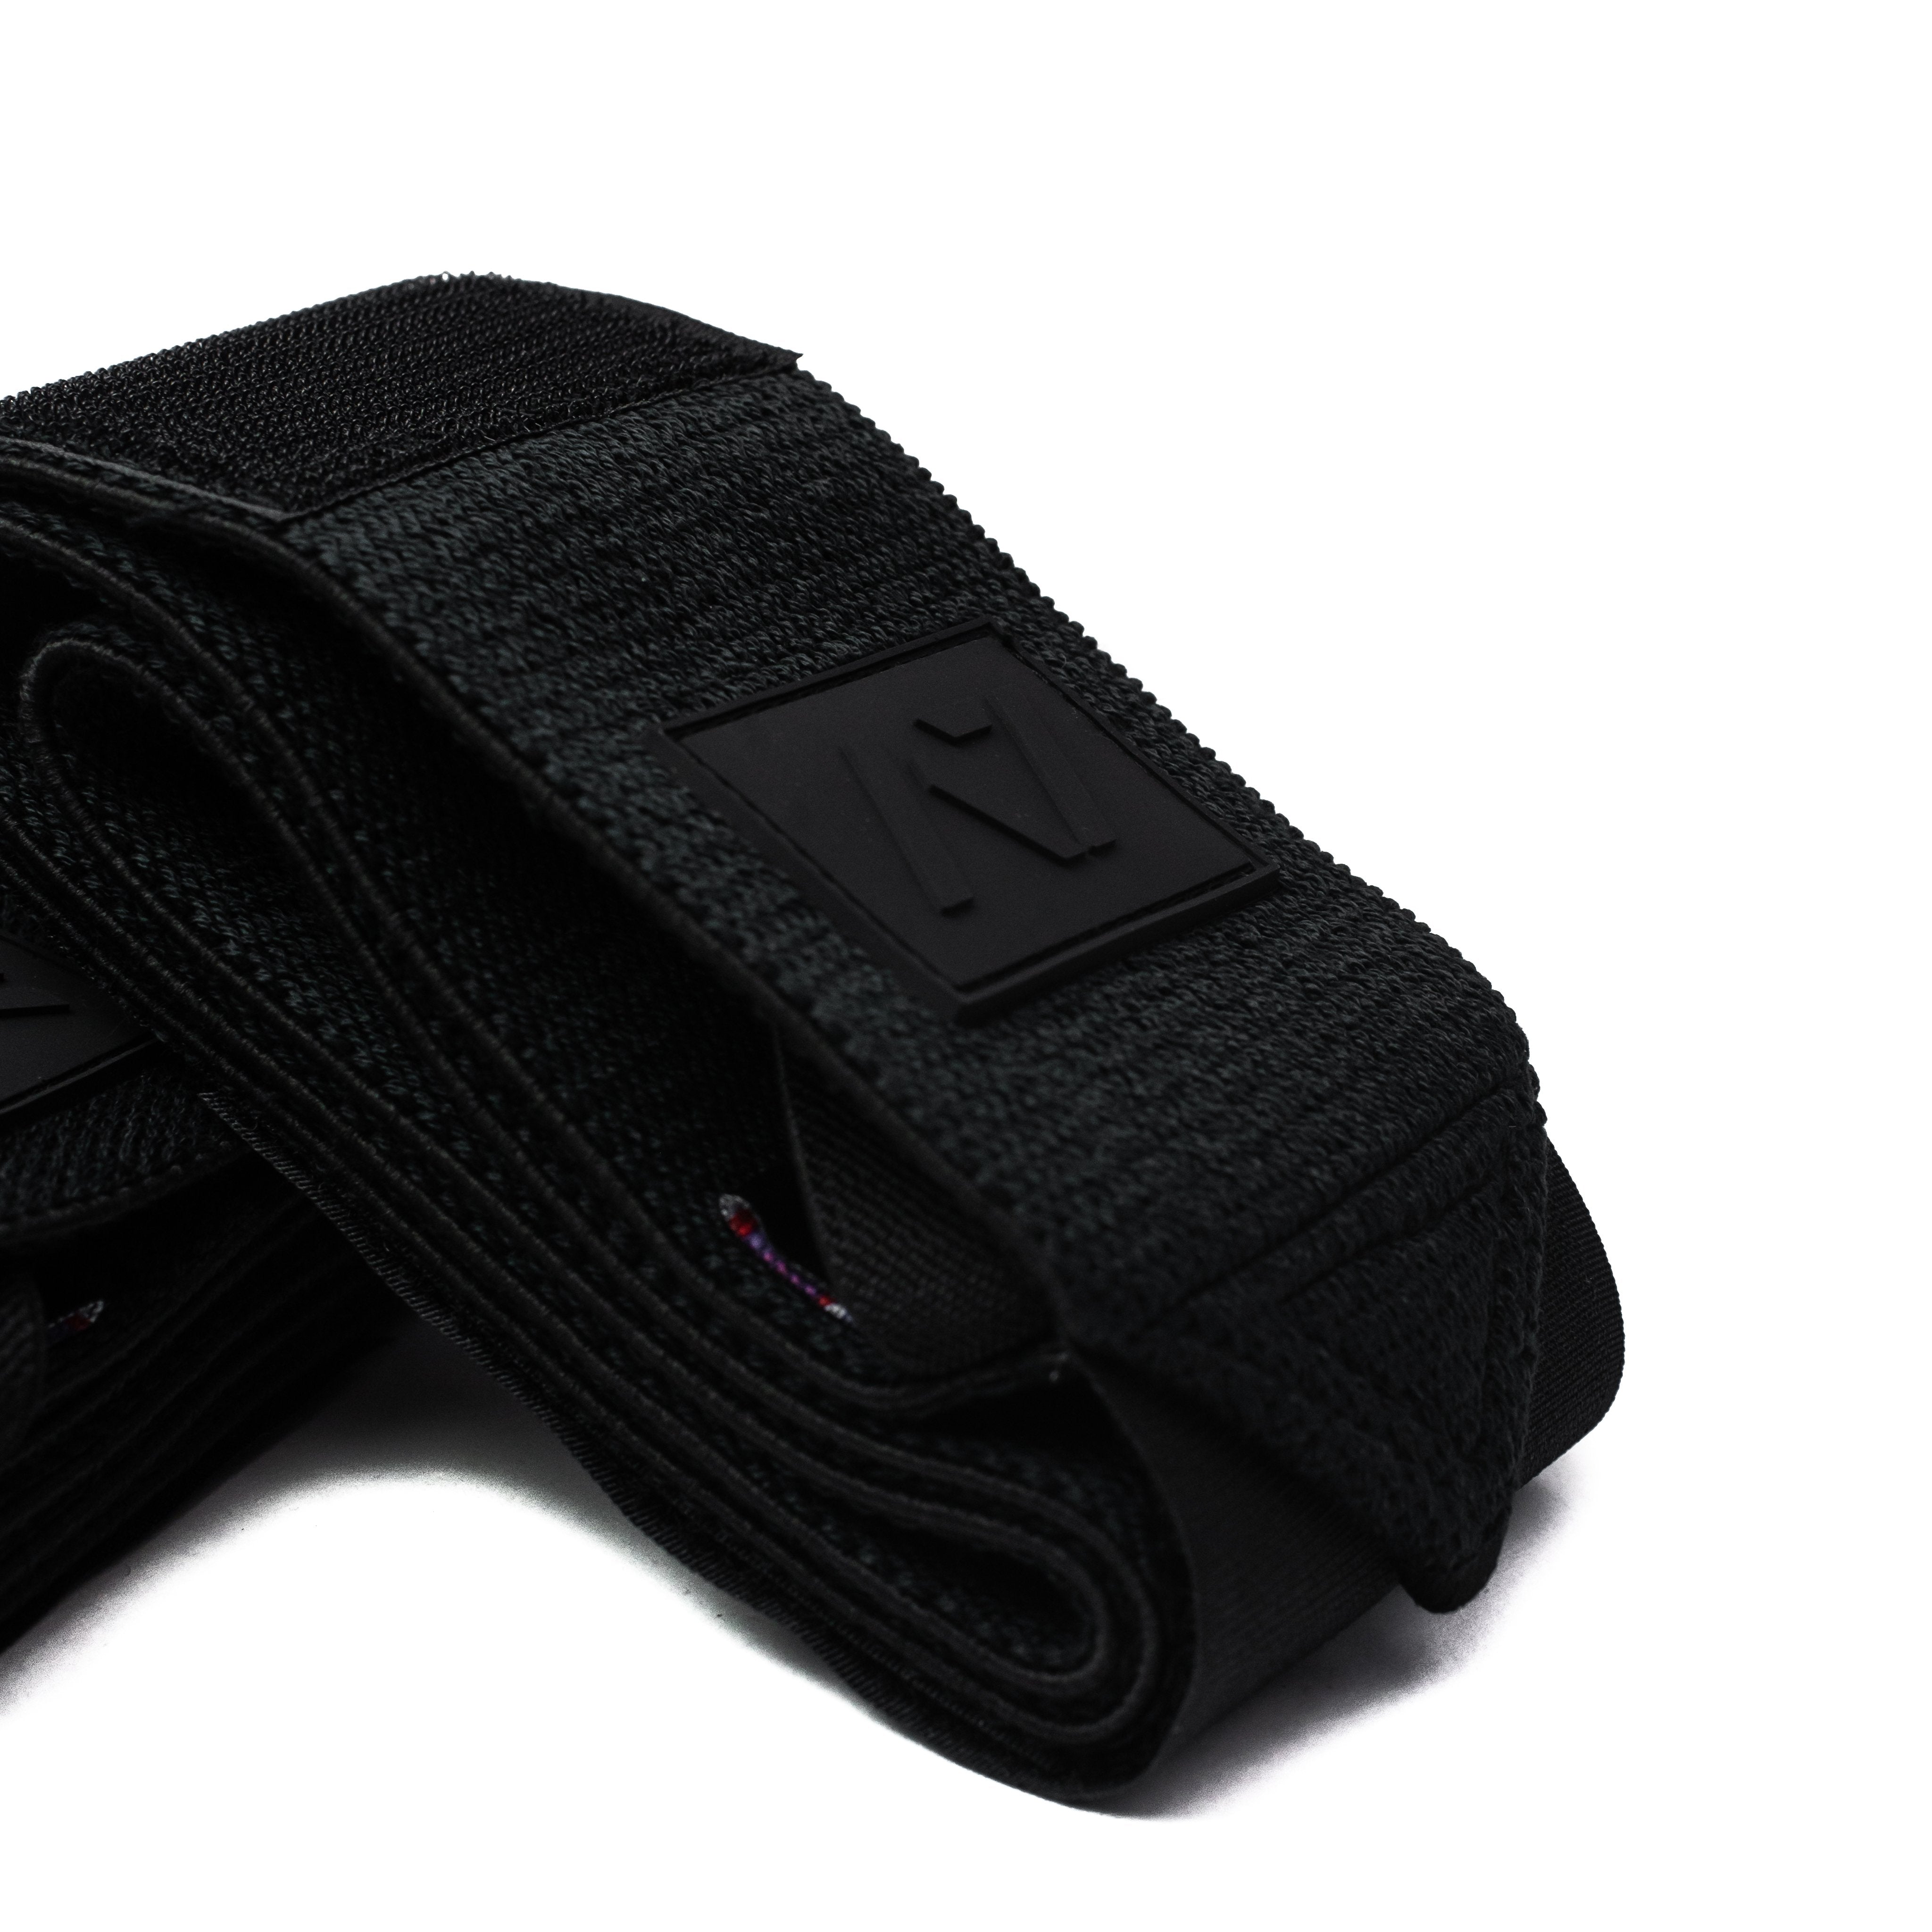 This Stealth colourway was created to mute out the logos and keep contrast at a minimum. A colourway that lets your performance and dedication remain the focus while still providing the level of quality, support and comfort you demand from your products. These wrist wraps are a perfect addition to your IPF approved kit.